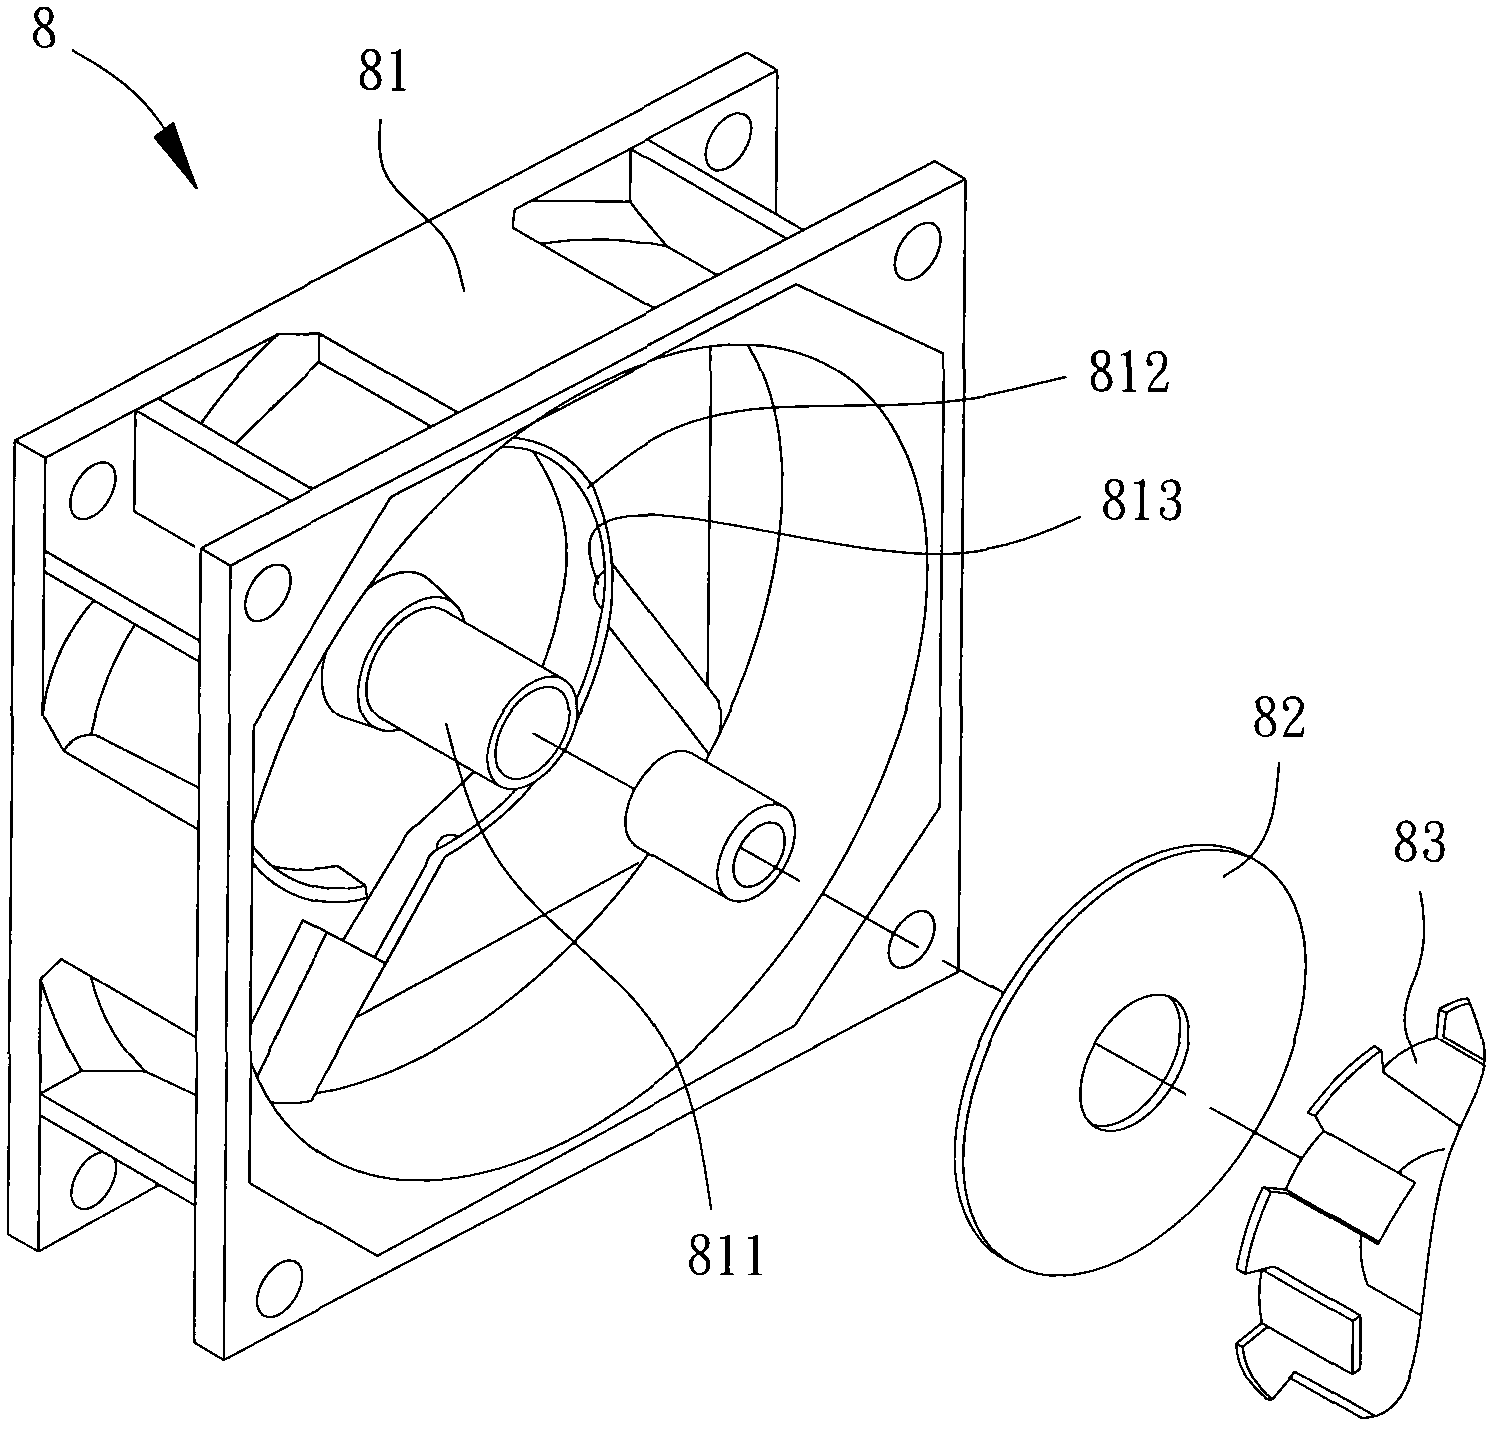 Miniature motor and cooling fan having the same